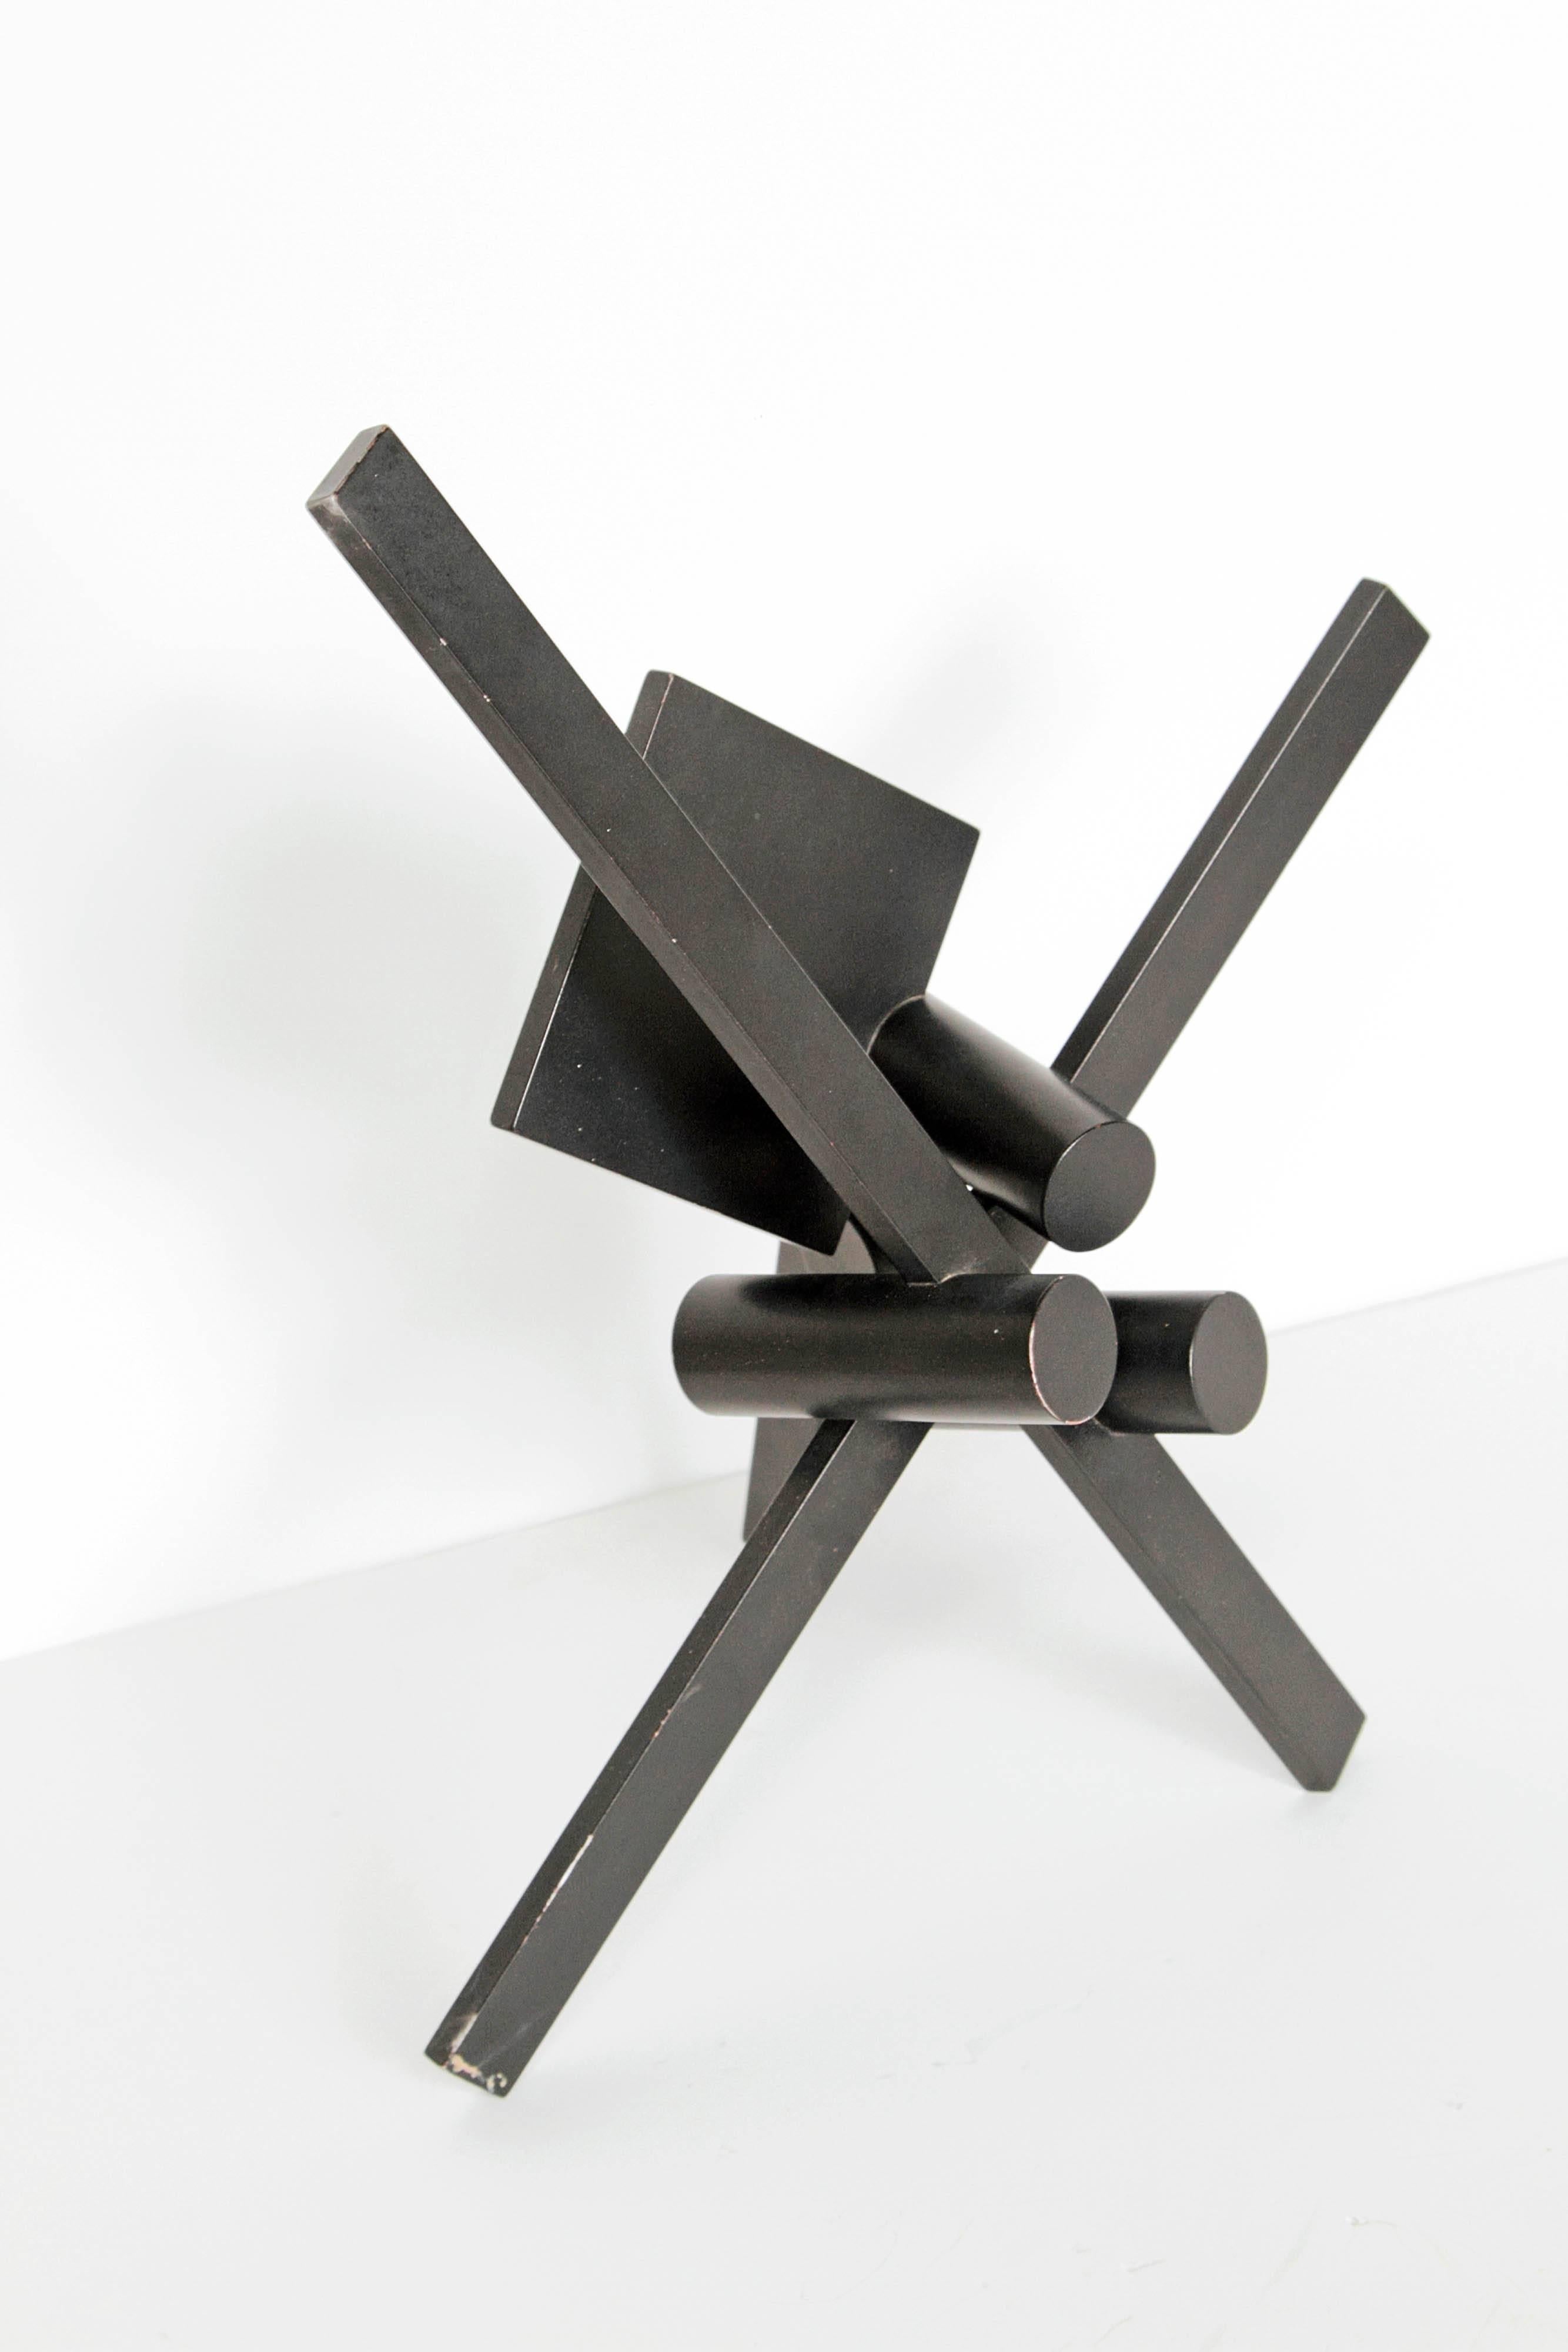 Small Modern Sculpture / G P A Series 101681 by Tom Sayre 1